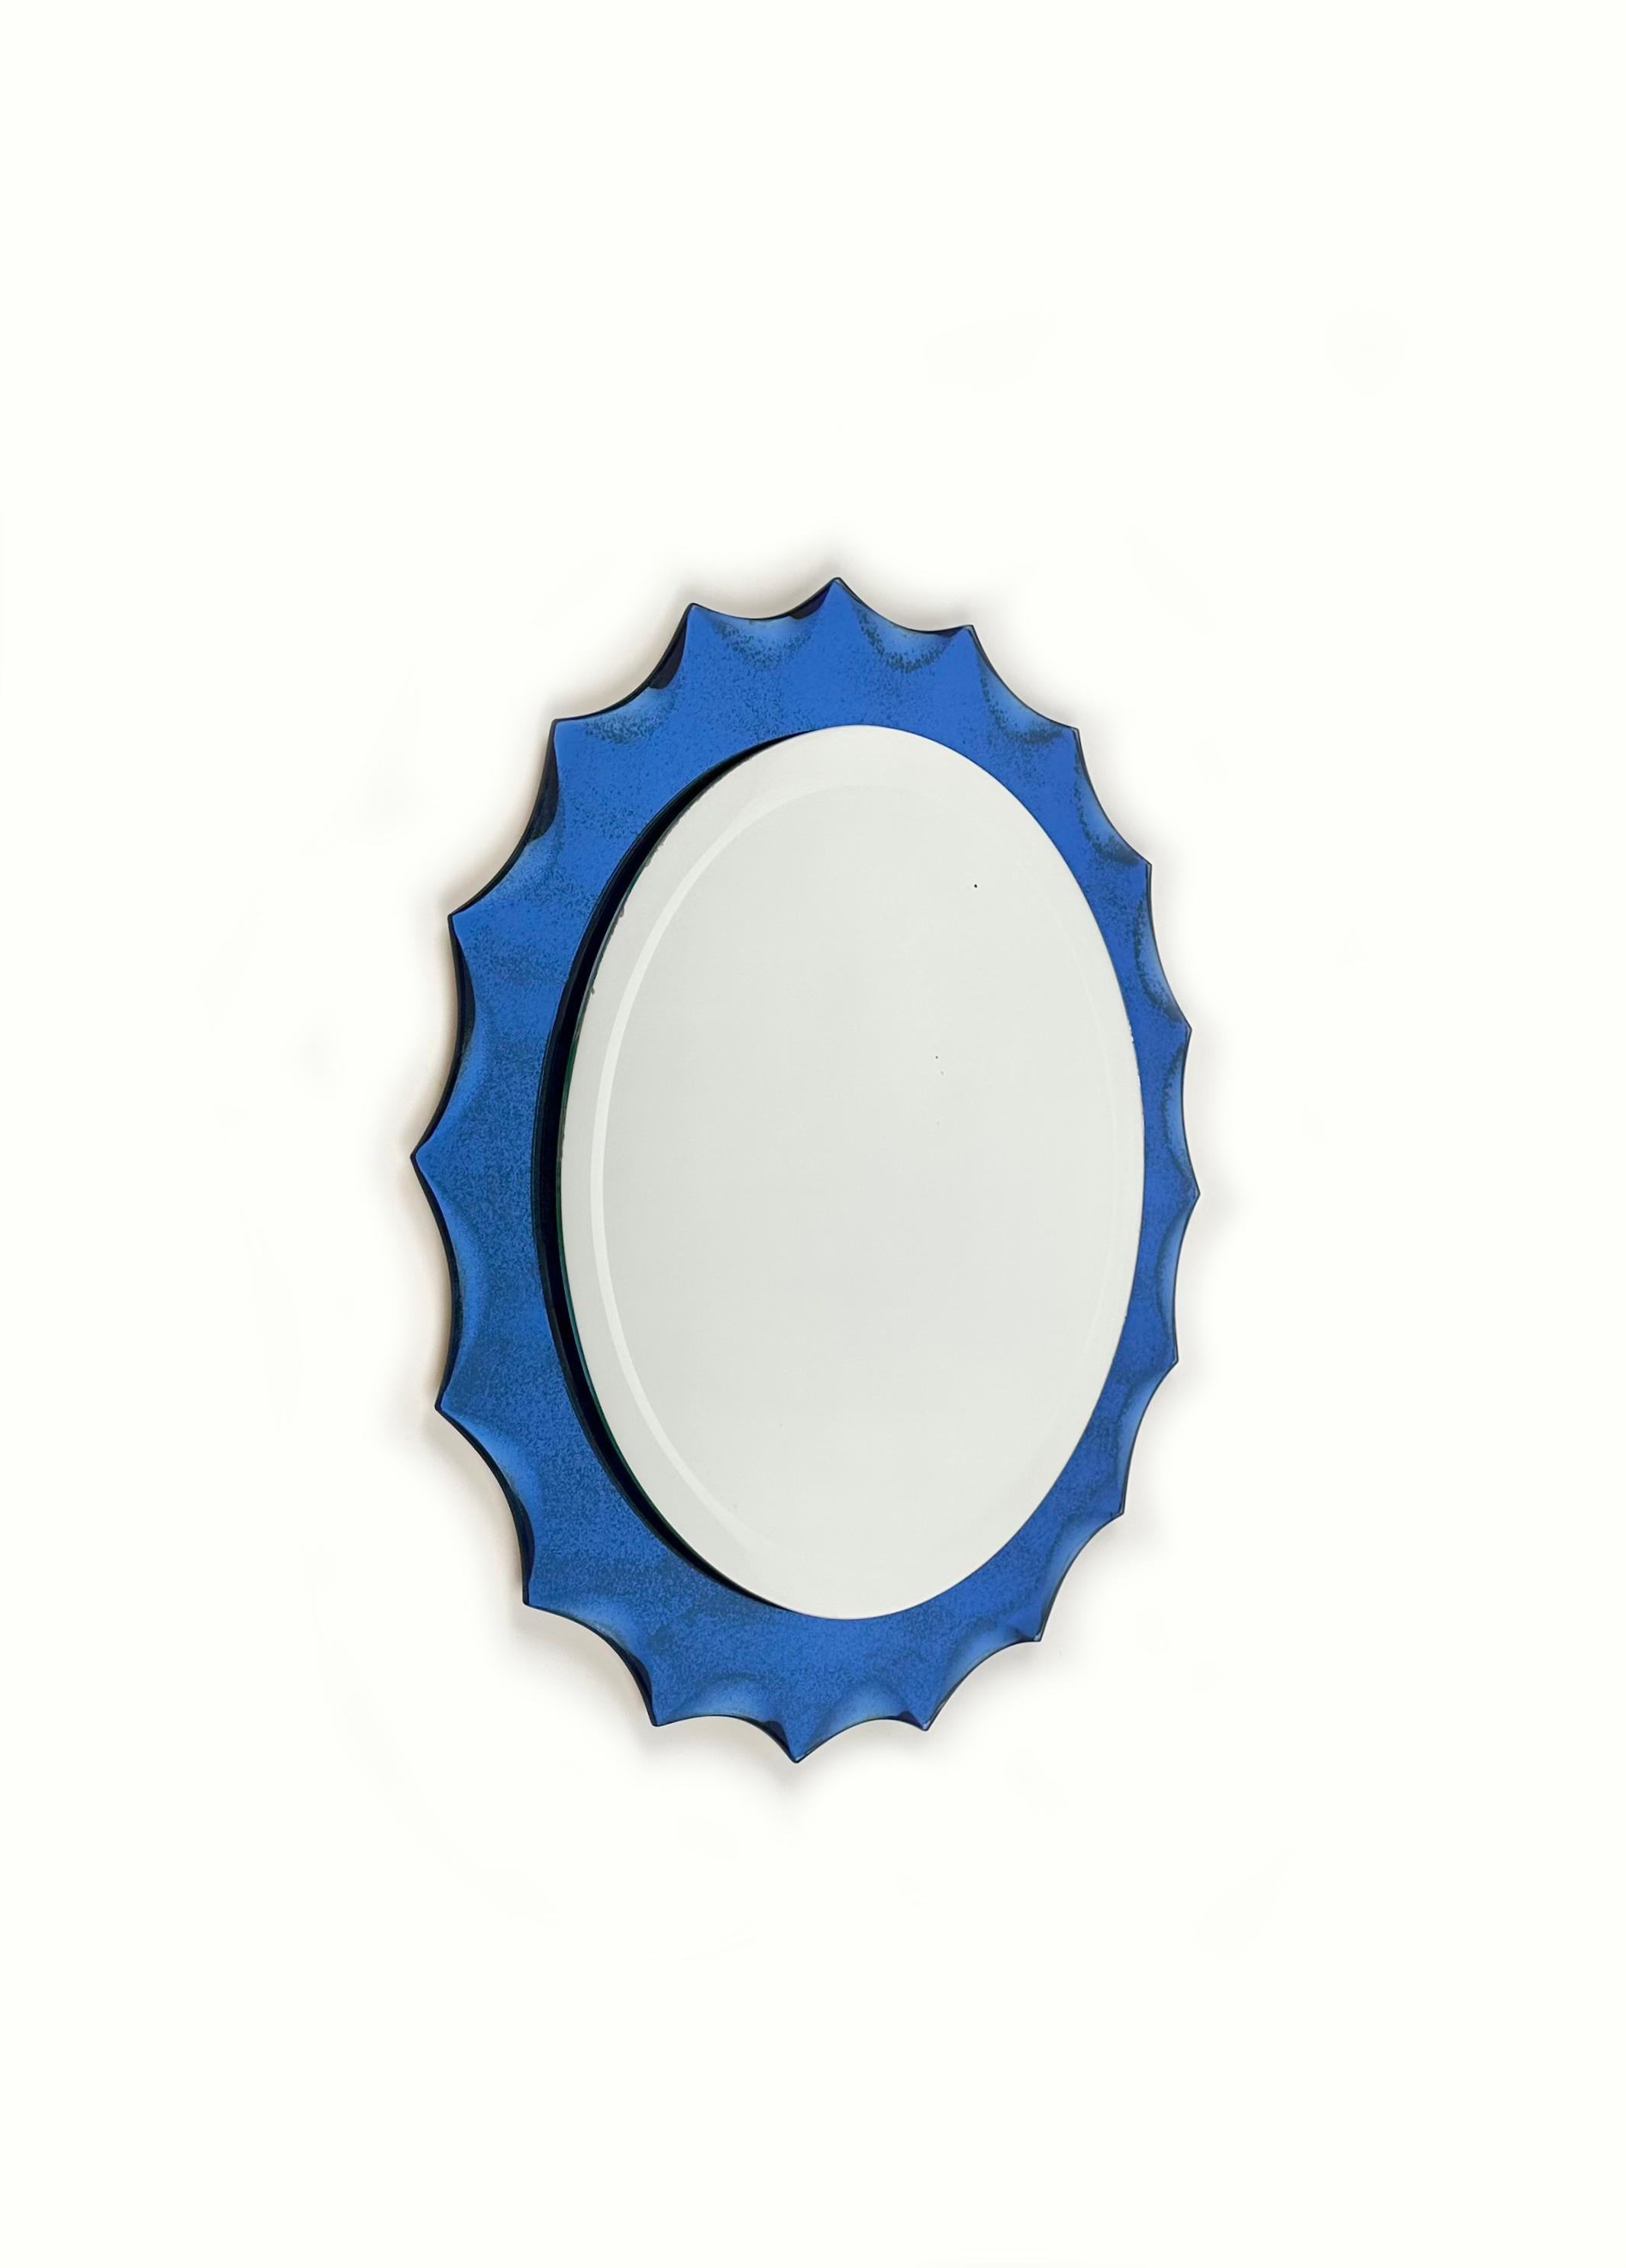 Wall mirror with cobalt blue sunburst frame in Fontana Arte style. 

Made in Italy in the 1960s.

As the pictures show, on the mirror there are signs of time due to the age of the piece (no chips).